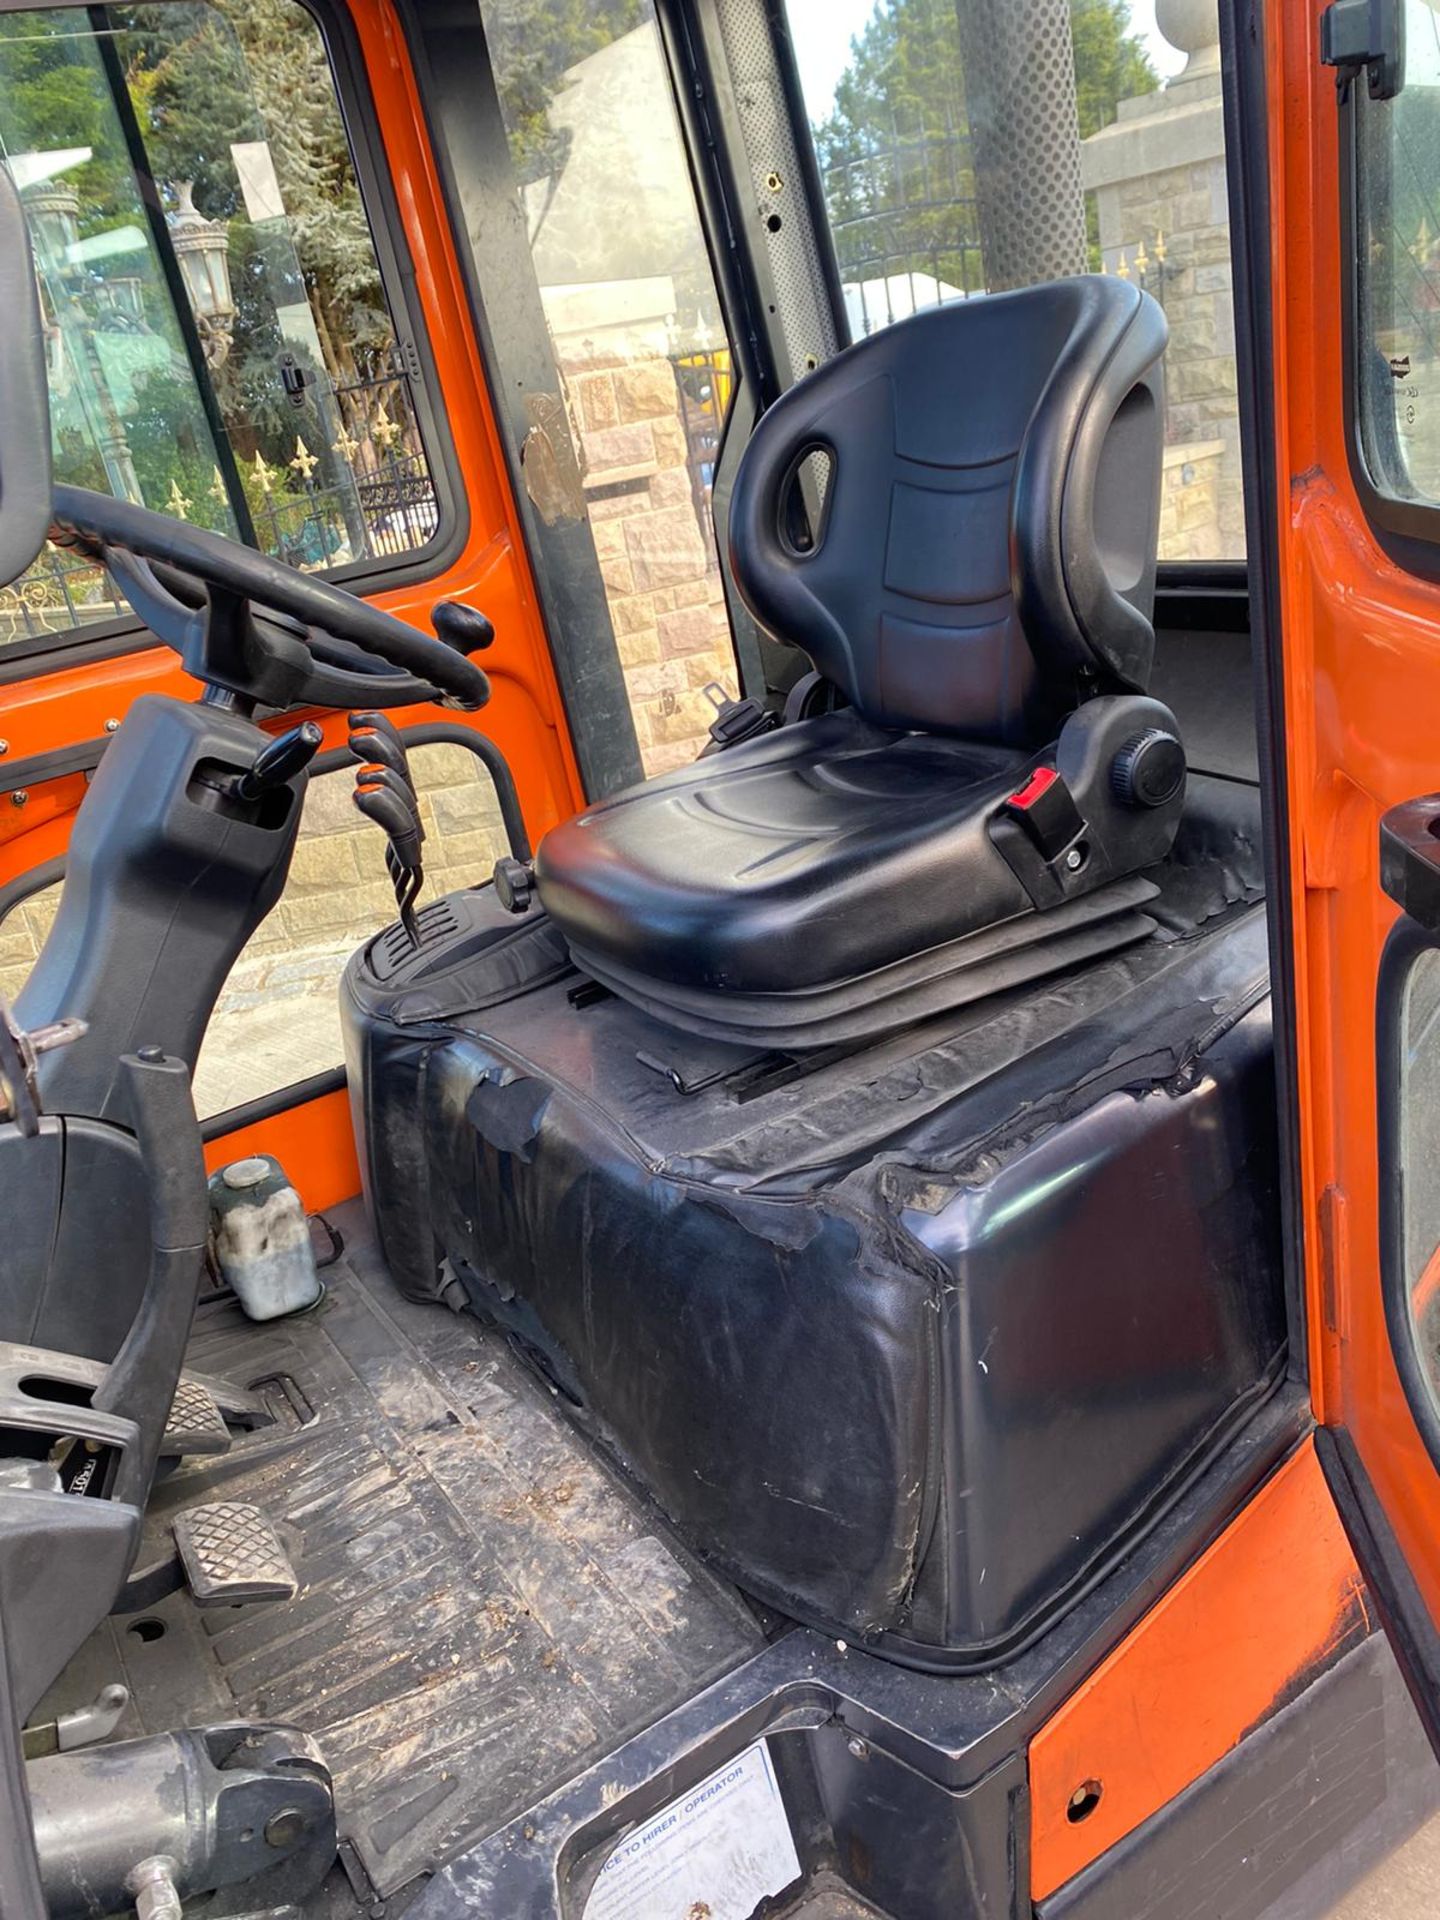 DOOSAN D3.5C-5 3 TON FORKLIFT, FULL GLASS CAB, YEAR 2012, IN GOOD CONDITION, RUNS, WORKS AND LIFTS - Image 10 of 13